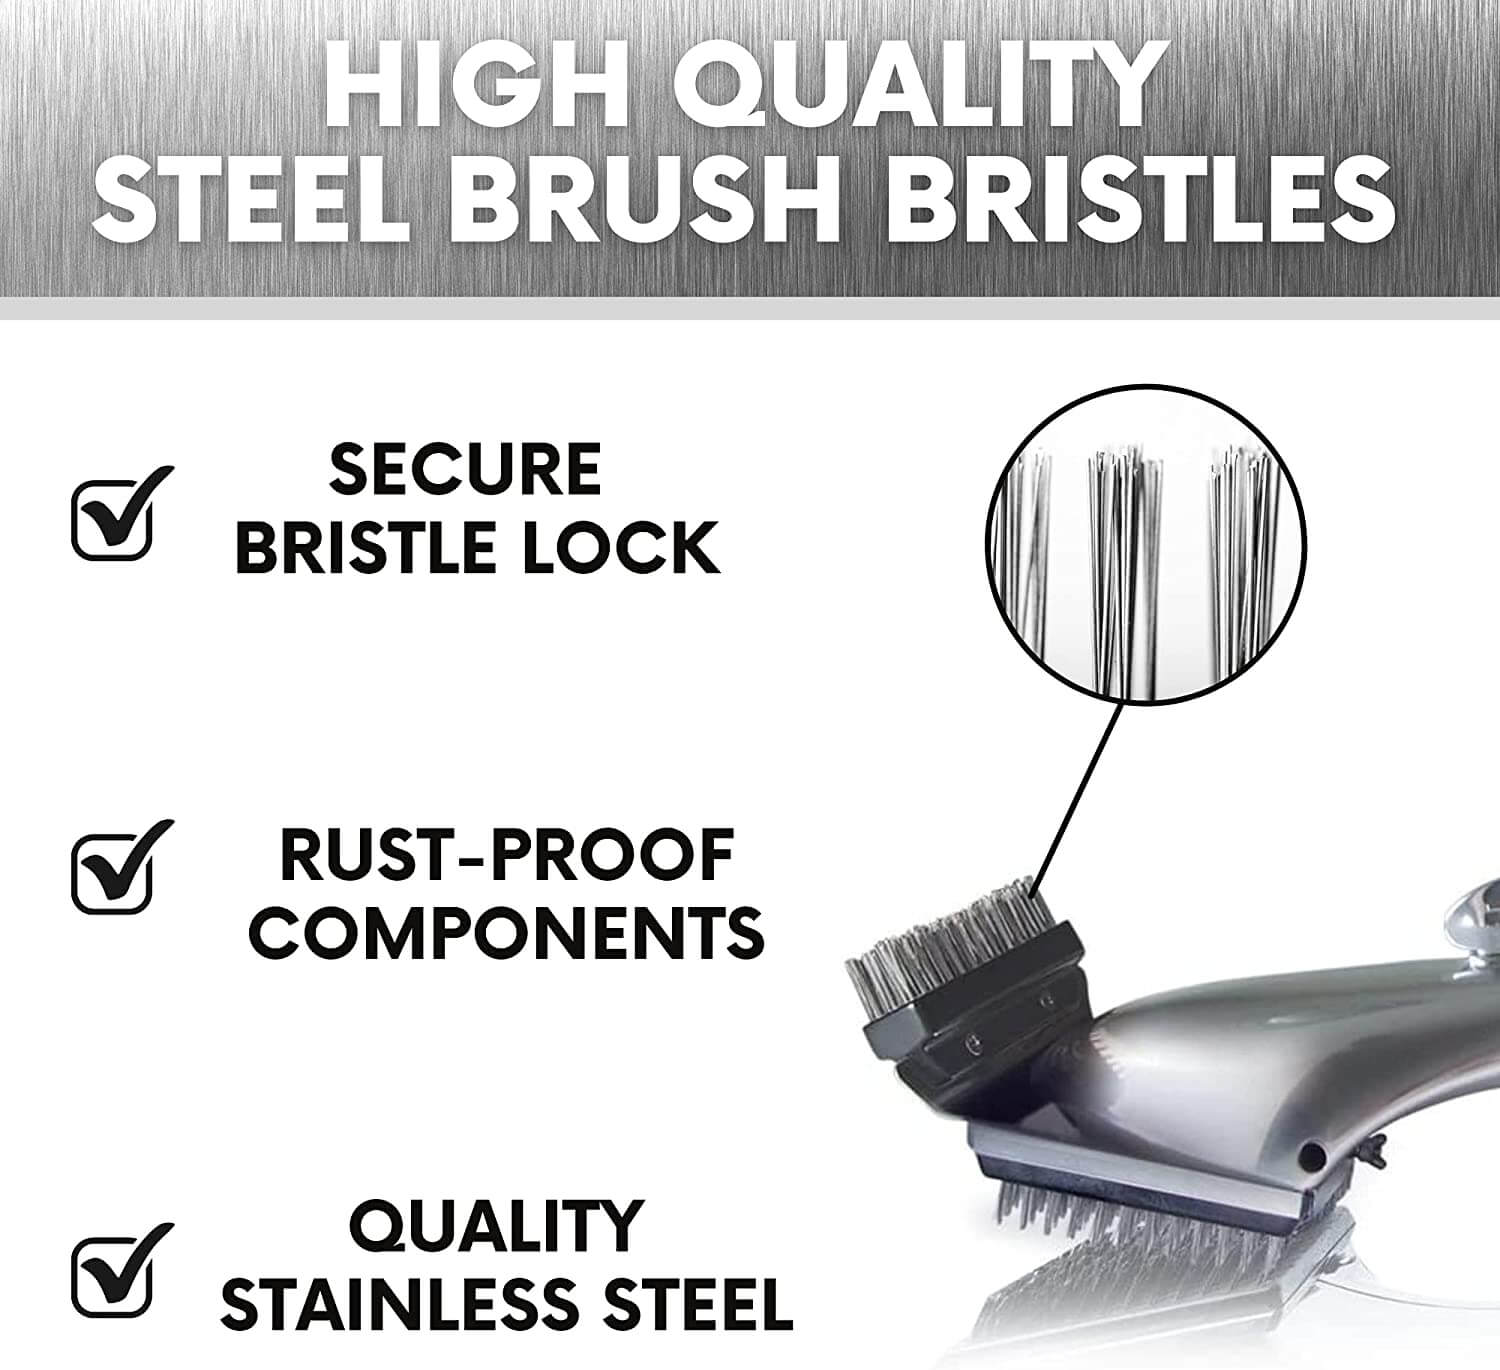 Stainless Steel BBQ Cleaning Brush - LINWEY - Best Stainless Steel BBQ Cleaning Brush